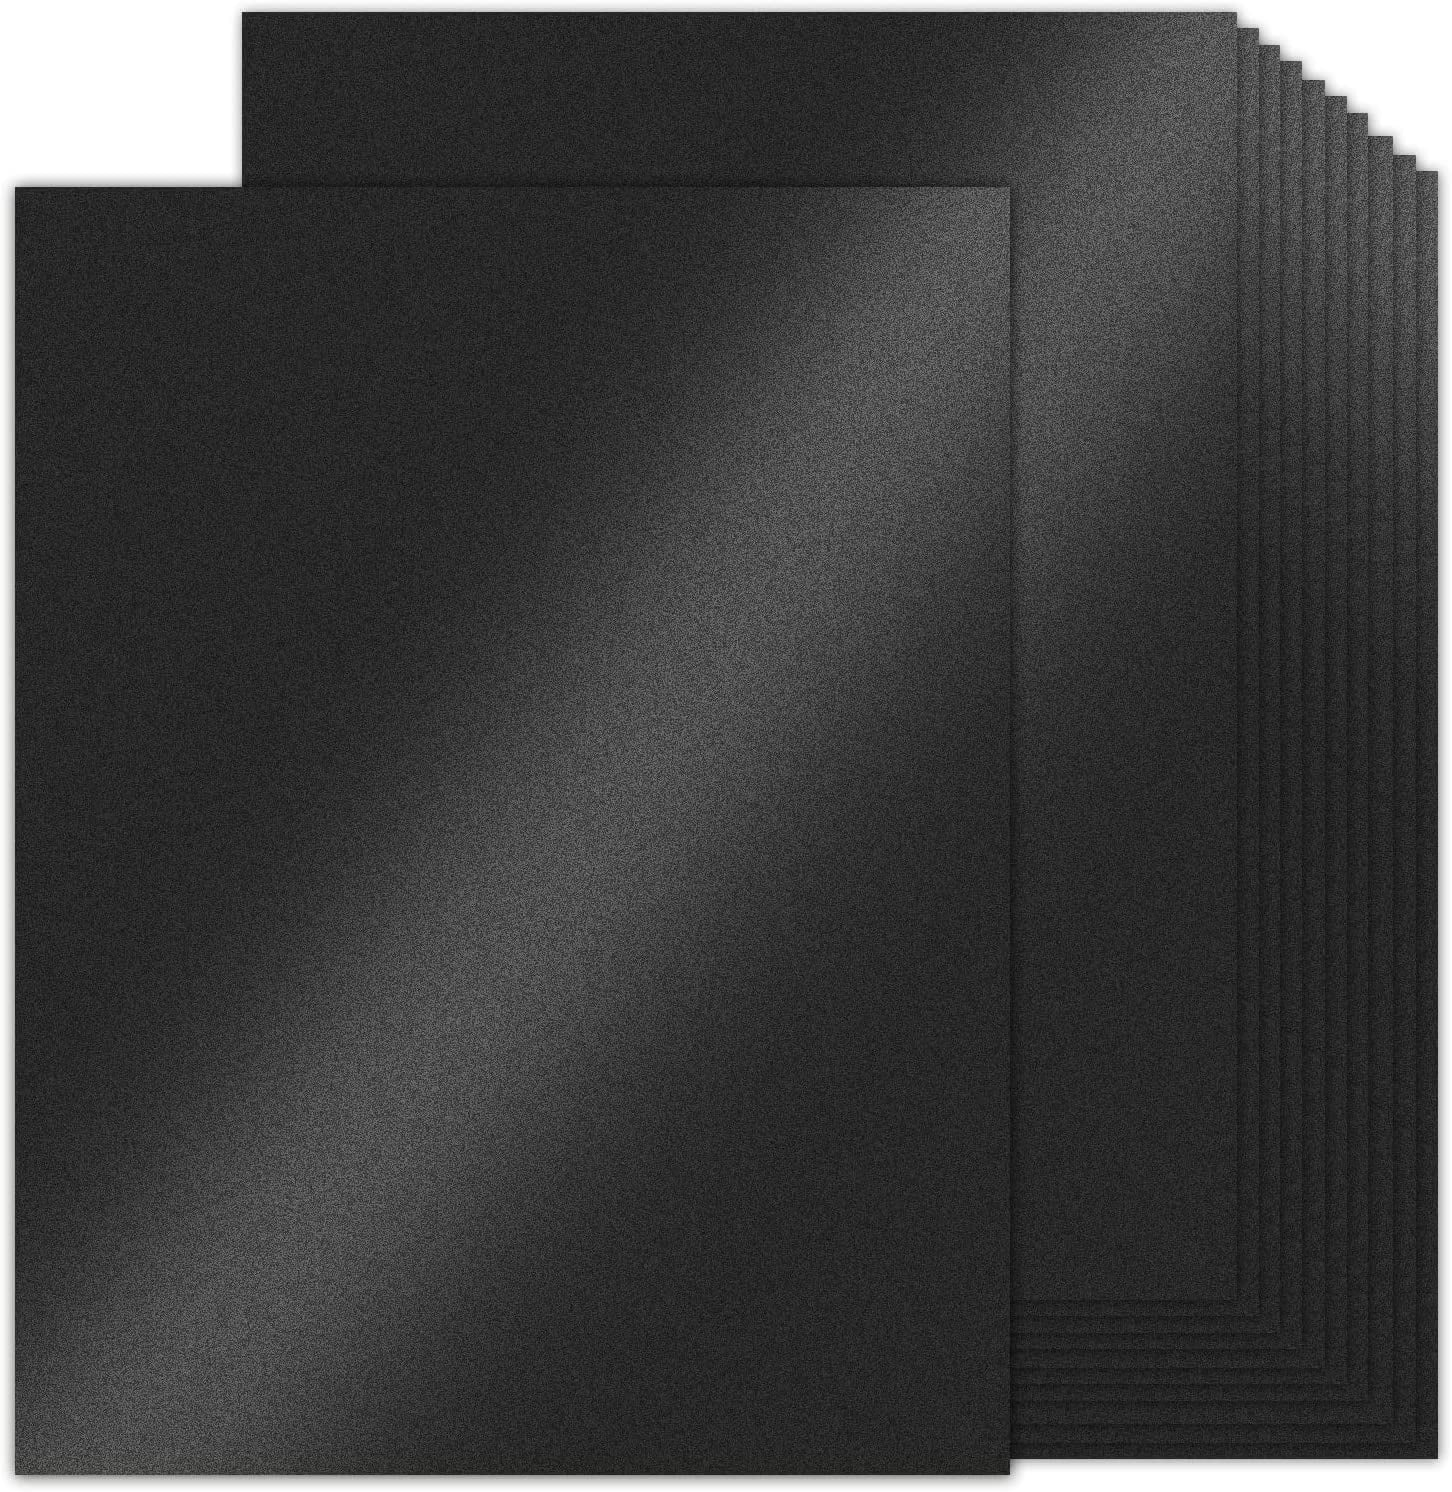 100 Sheets Black Shimmer Cardstock 8.5 x 11 Metallic Paper, Goefun 80lb  Card Stock Letter Size Sheets for Halloween, Invitations, Scrapbooking